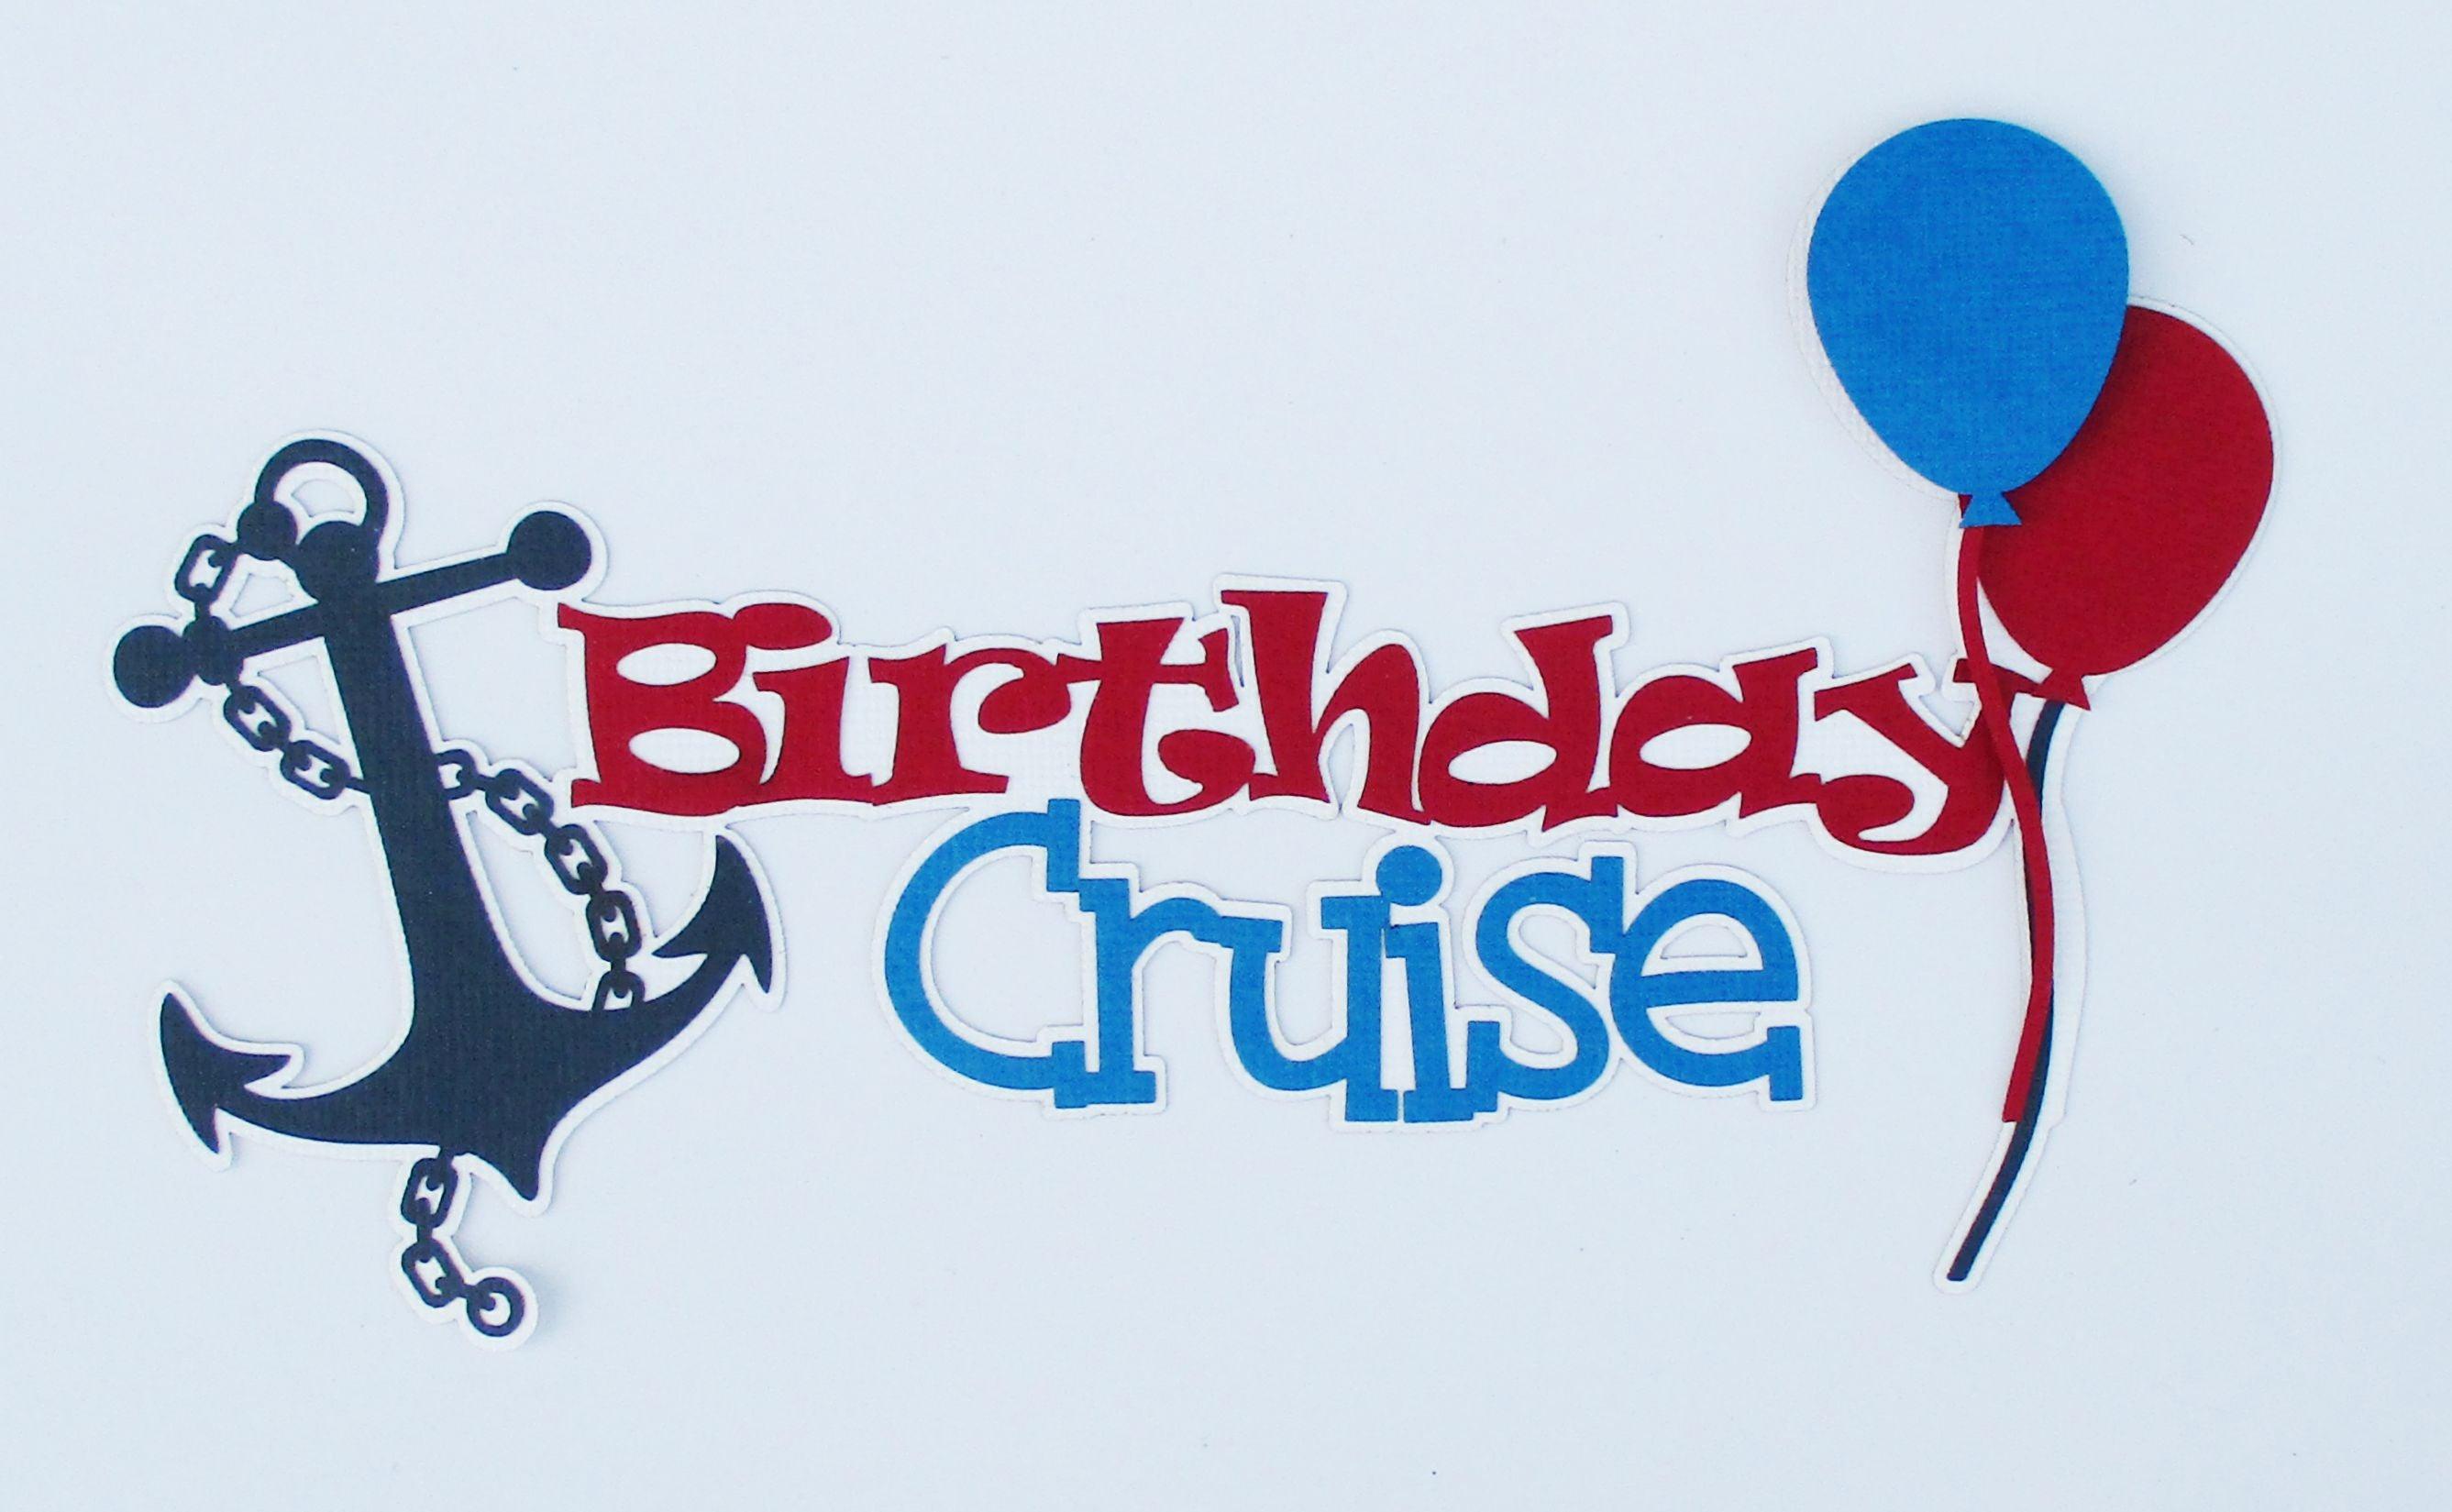 Birthday Cruise 4 x 8 Title and Balloon Set Fully-Assembled Laser Cut Scrapbook Embellishment by SSC Laser Designs